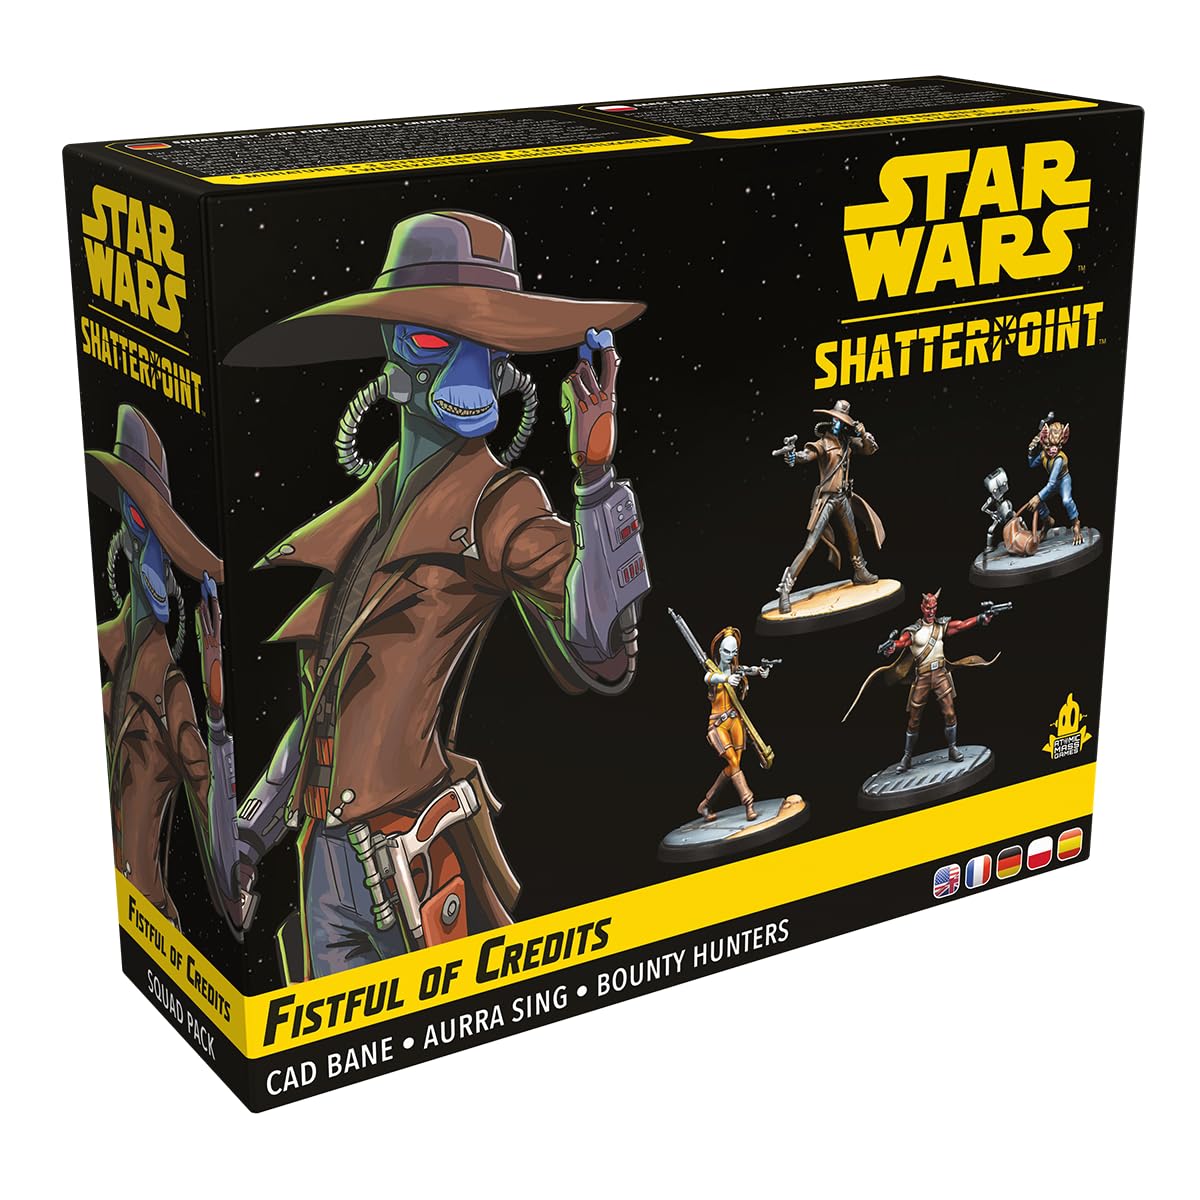 Atomic Mass Games Star Wars Shatterpoint Fistful of Credits Squad Pack - Tabletop Miniatures Game, Strategy Game for Kids and Adults, Ages 14+, 2 Players, 90 Minute Playtime, Made